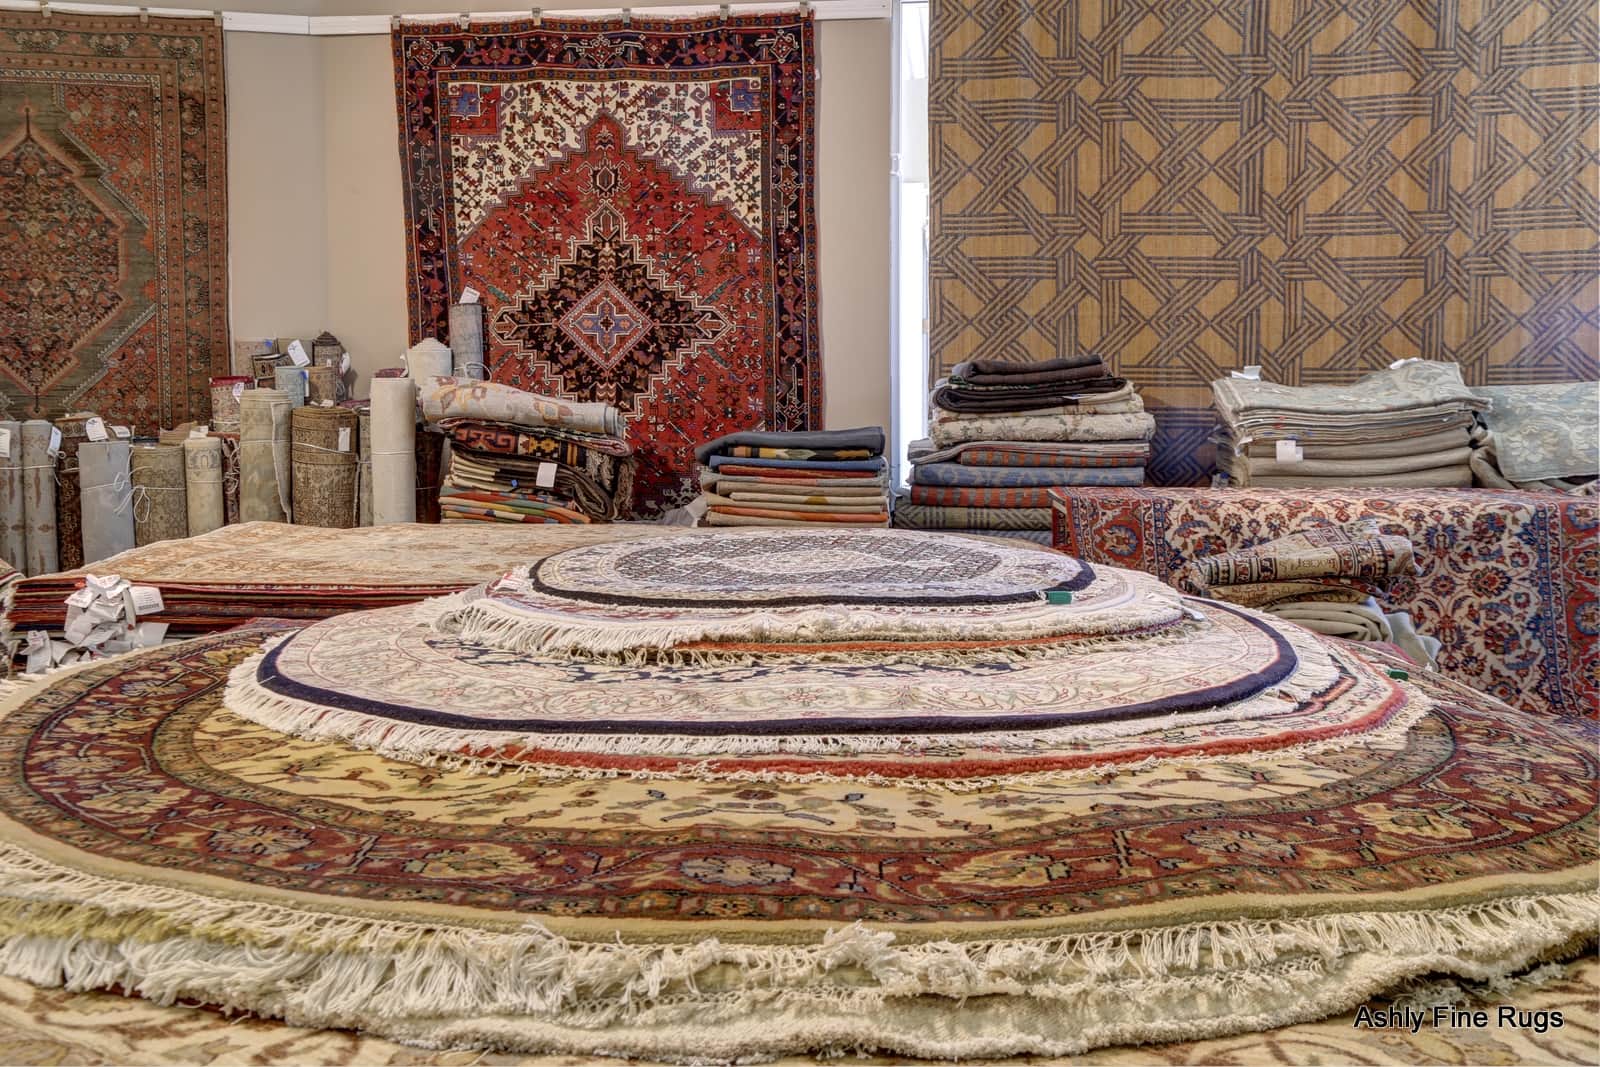 Choosing a Rug That Suits Your Home